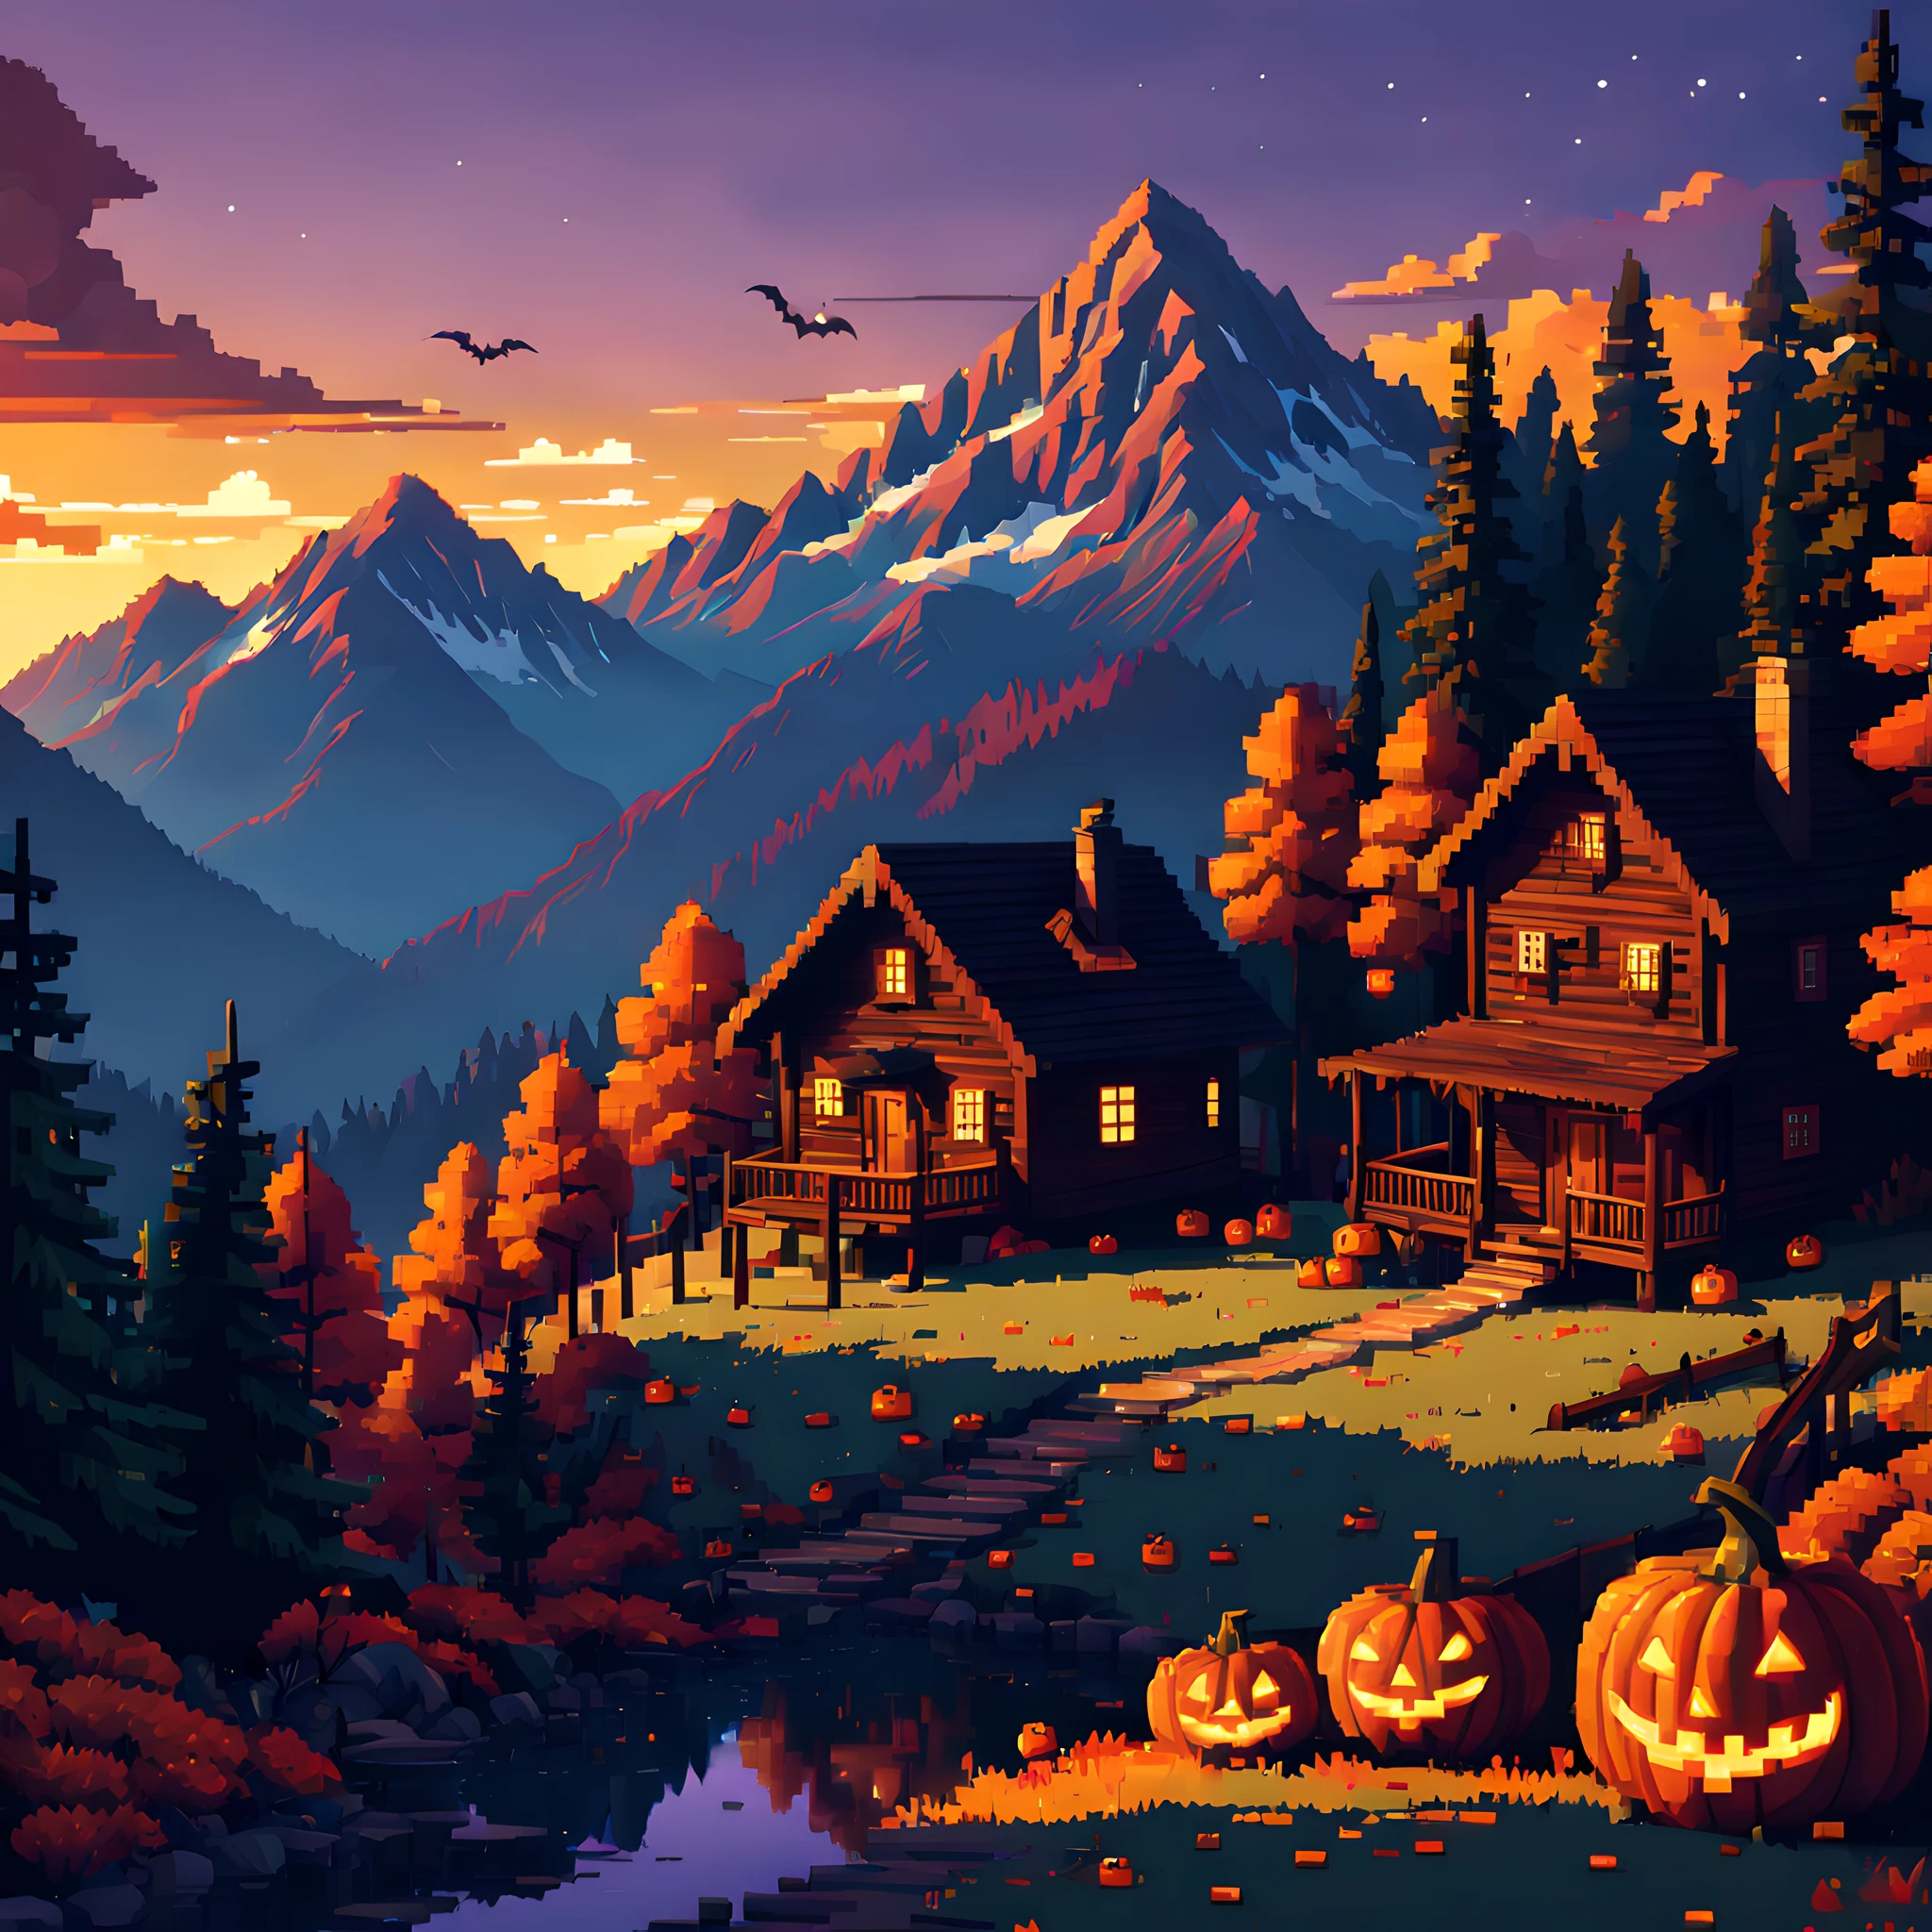 (halloween theme:1.3), (Mountain Cabin (Mountain Cabin) (Mountain Cabin (Mountain Cabin)) (Mountain Cabin (Mountain Cabin) (Mountain Cabin (Mountain Cabin))) (Mountain Cabin (Mountain Cabin) (Mountain Cabin (Mountain Cabin)) (Mountain Cabin (Mountain Cabin) (Mountain Cabin (Mountain Cabin)))):1.3), (Pixel art:1.5),  Mountain road decorated for Halloween、Halloween Decoration Hats、Autumn mountain hut、Colored leaves、Sunset、A mountain hut bathed in the setting sun、evening glow、